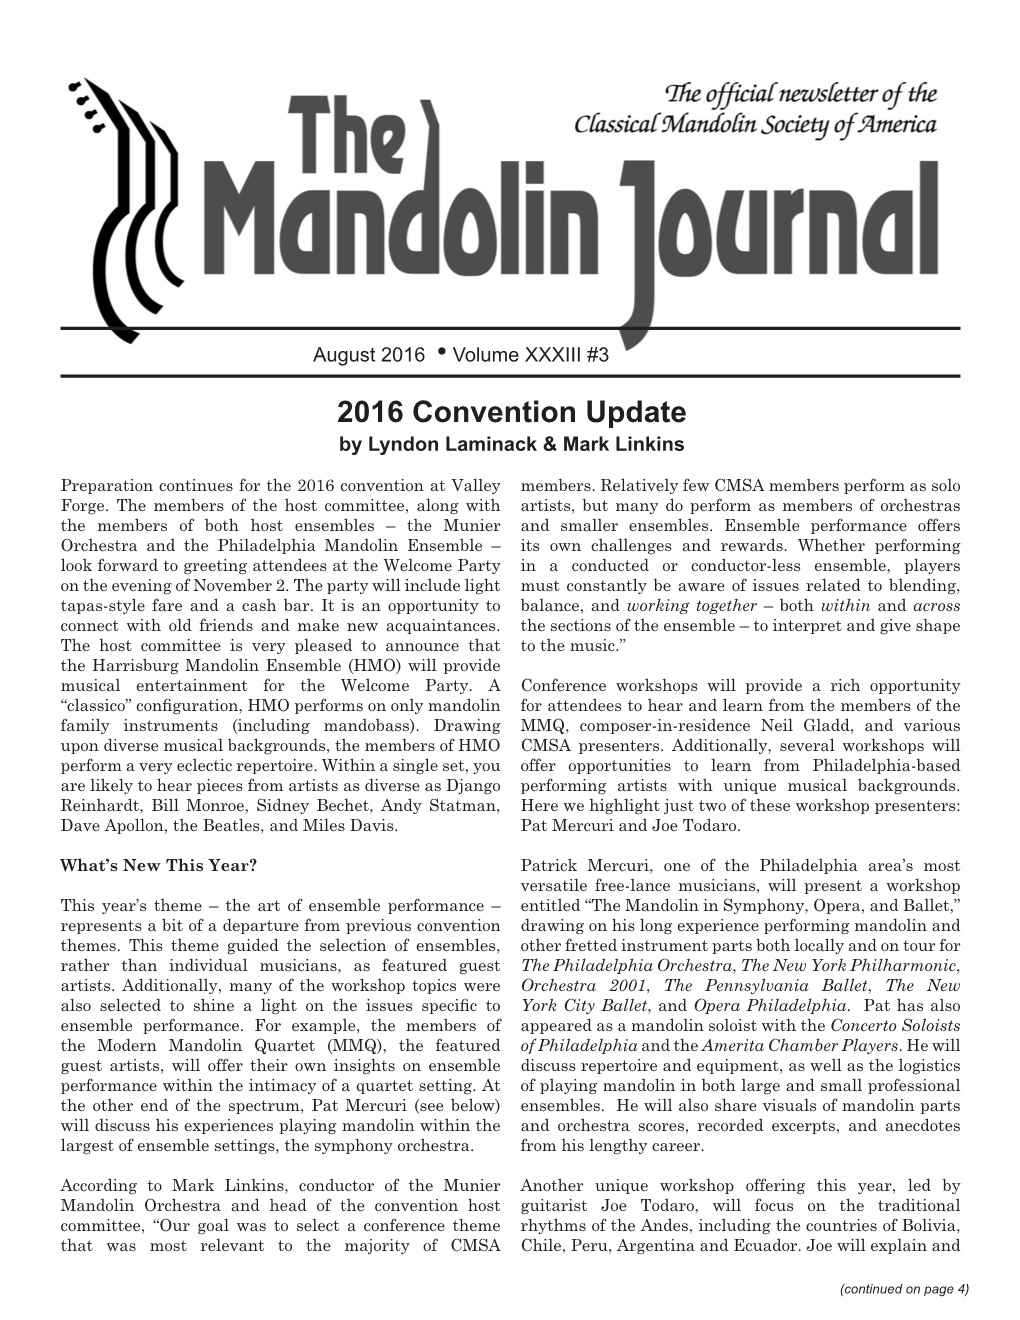 2016 Convention Update by Lyndon Laminack & Mark Linkins